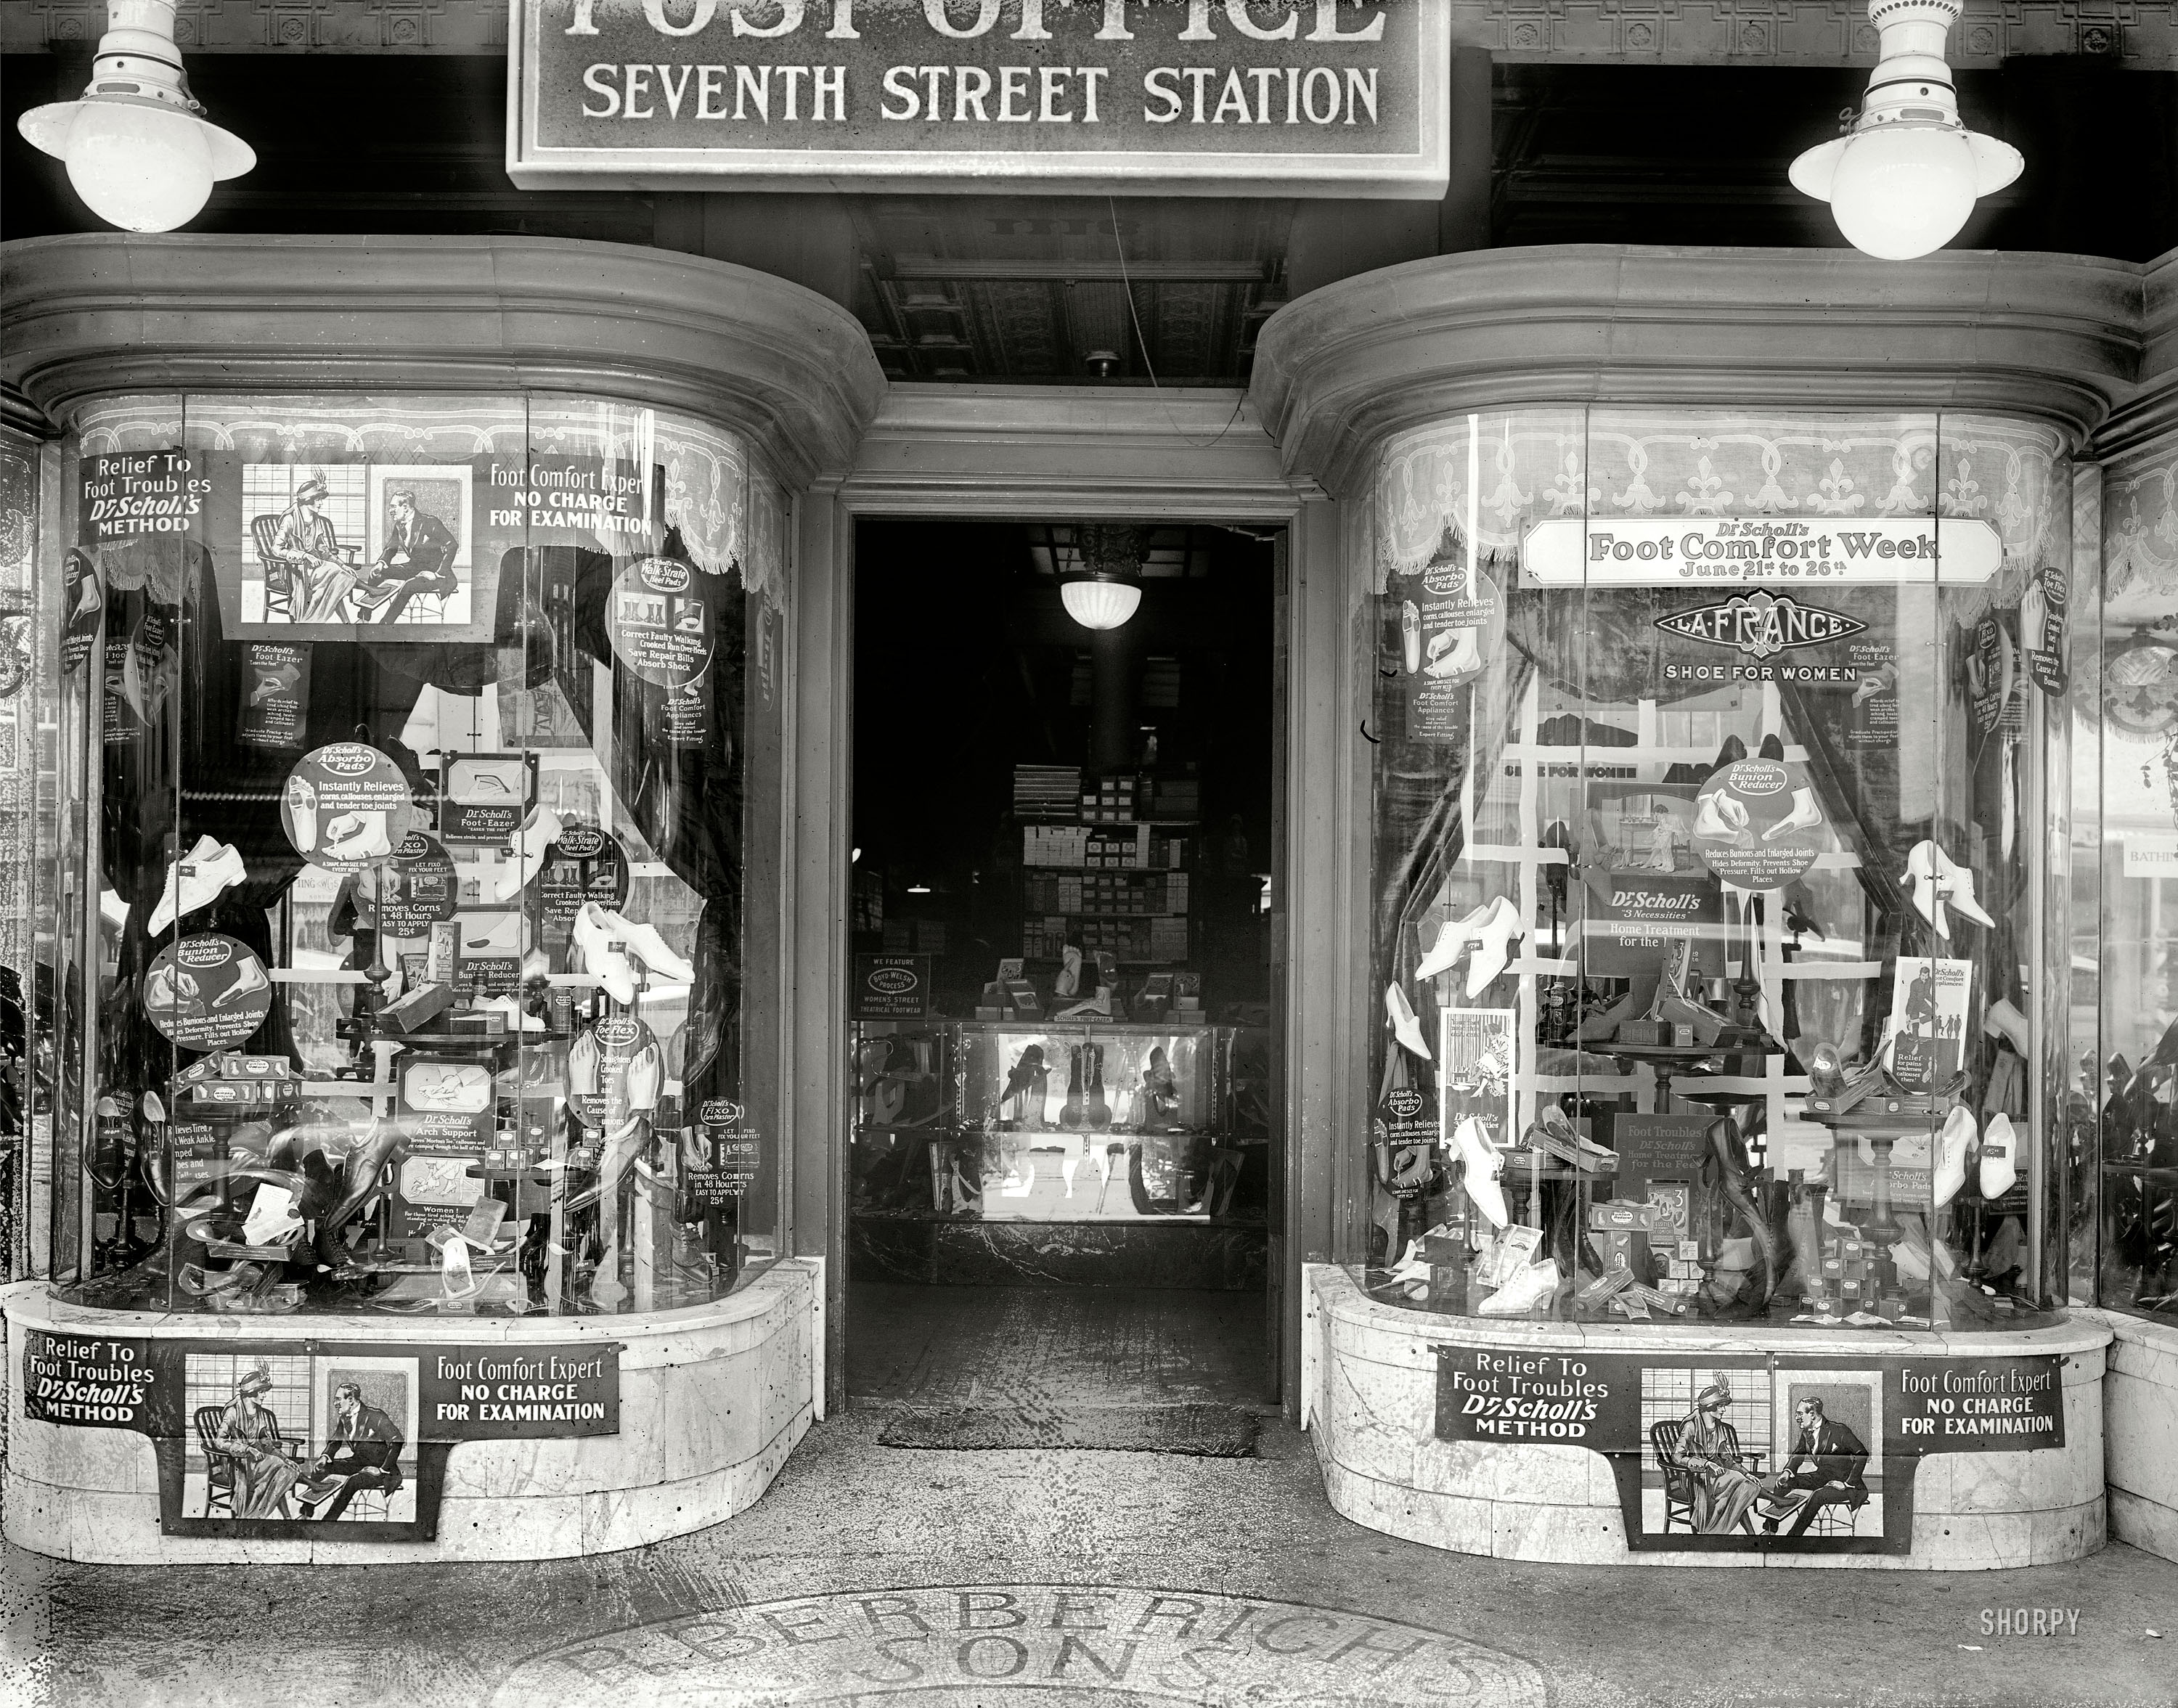 June 1920. "Berberich store window, Seventh Street." The venerable Washington, D.C., shoe emporium. In the era of confining footwear, bunions, corns and calluses, it was Dr. Scholl to the rescue. National Photo Co. View full size.